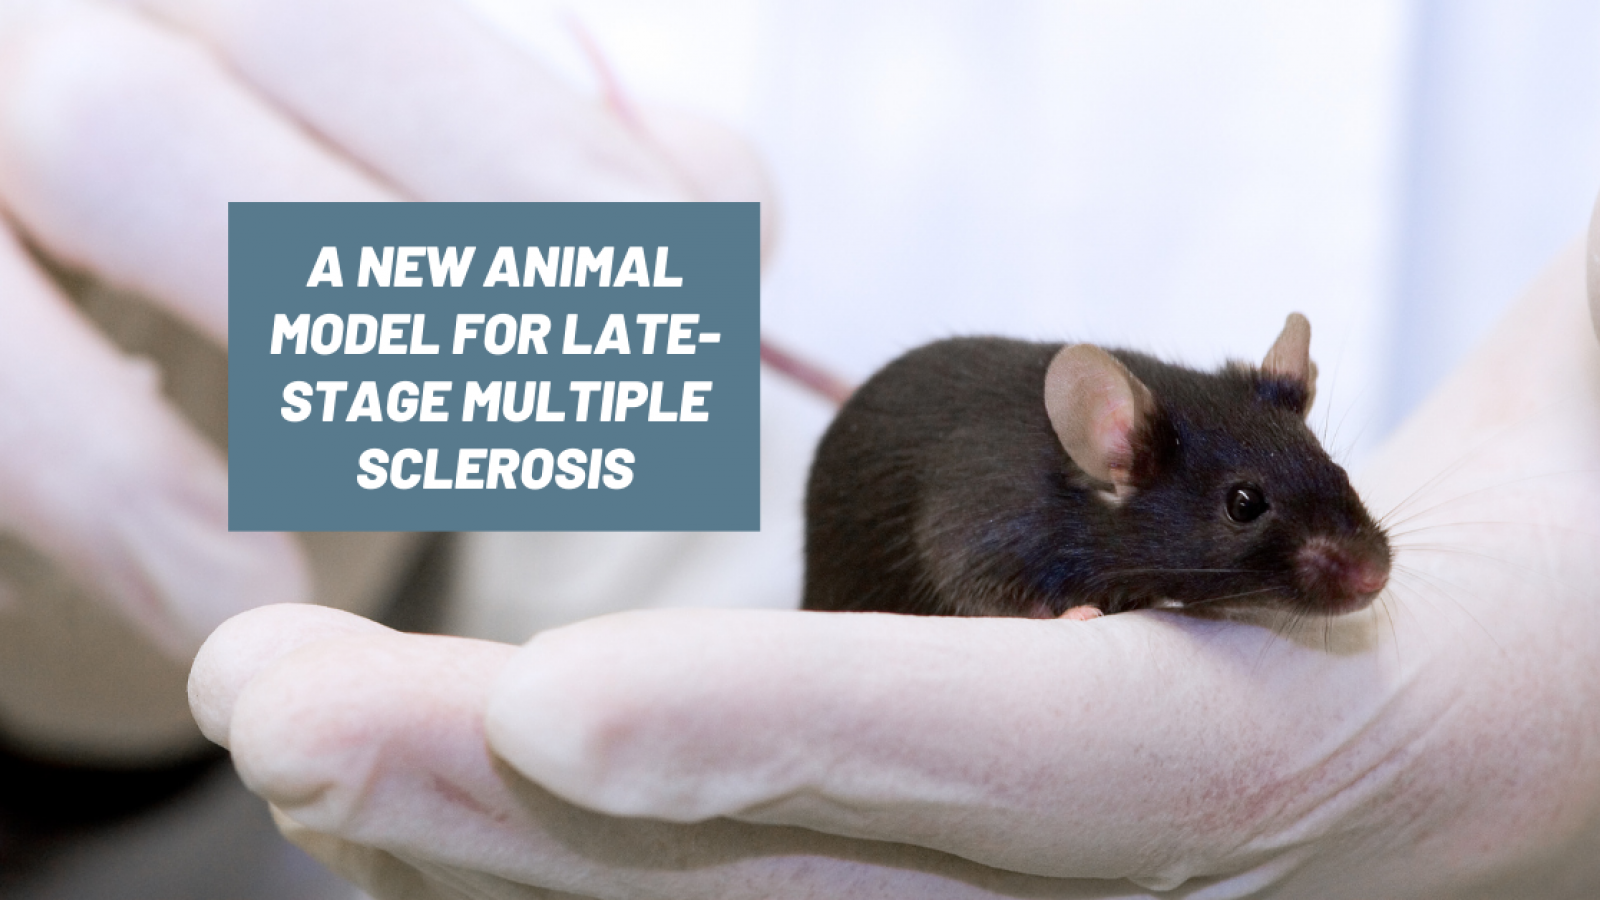 A new animal model for late-stage multiple sclerosis